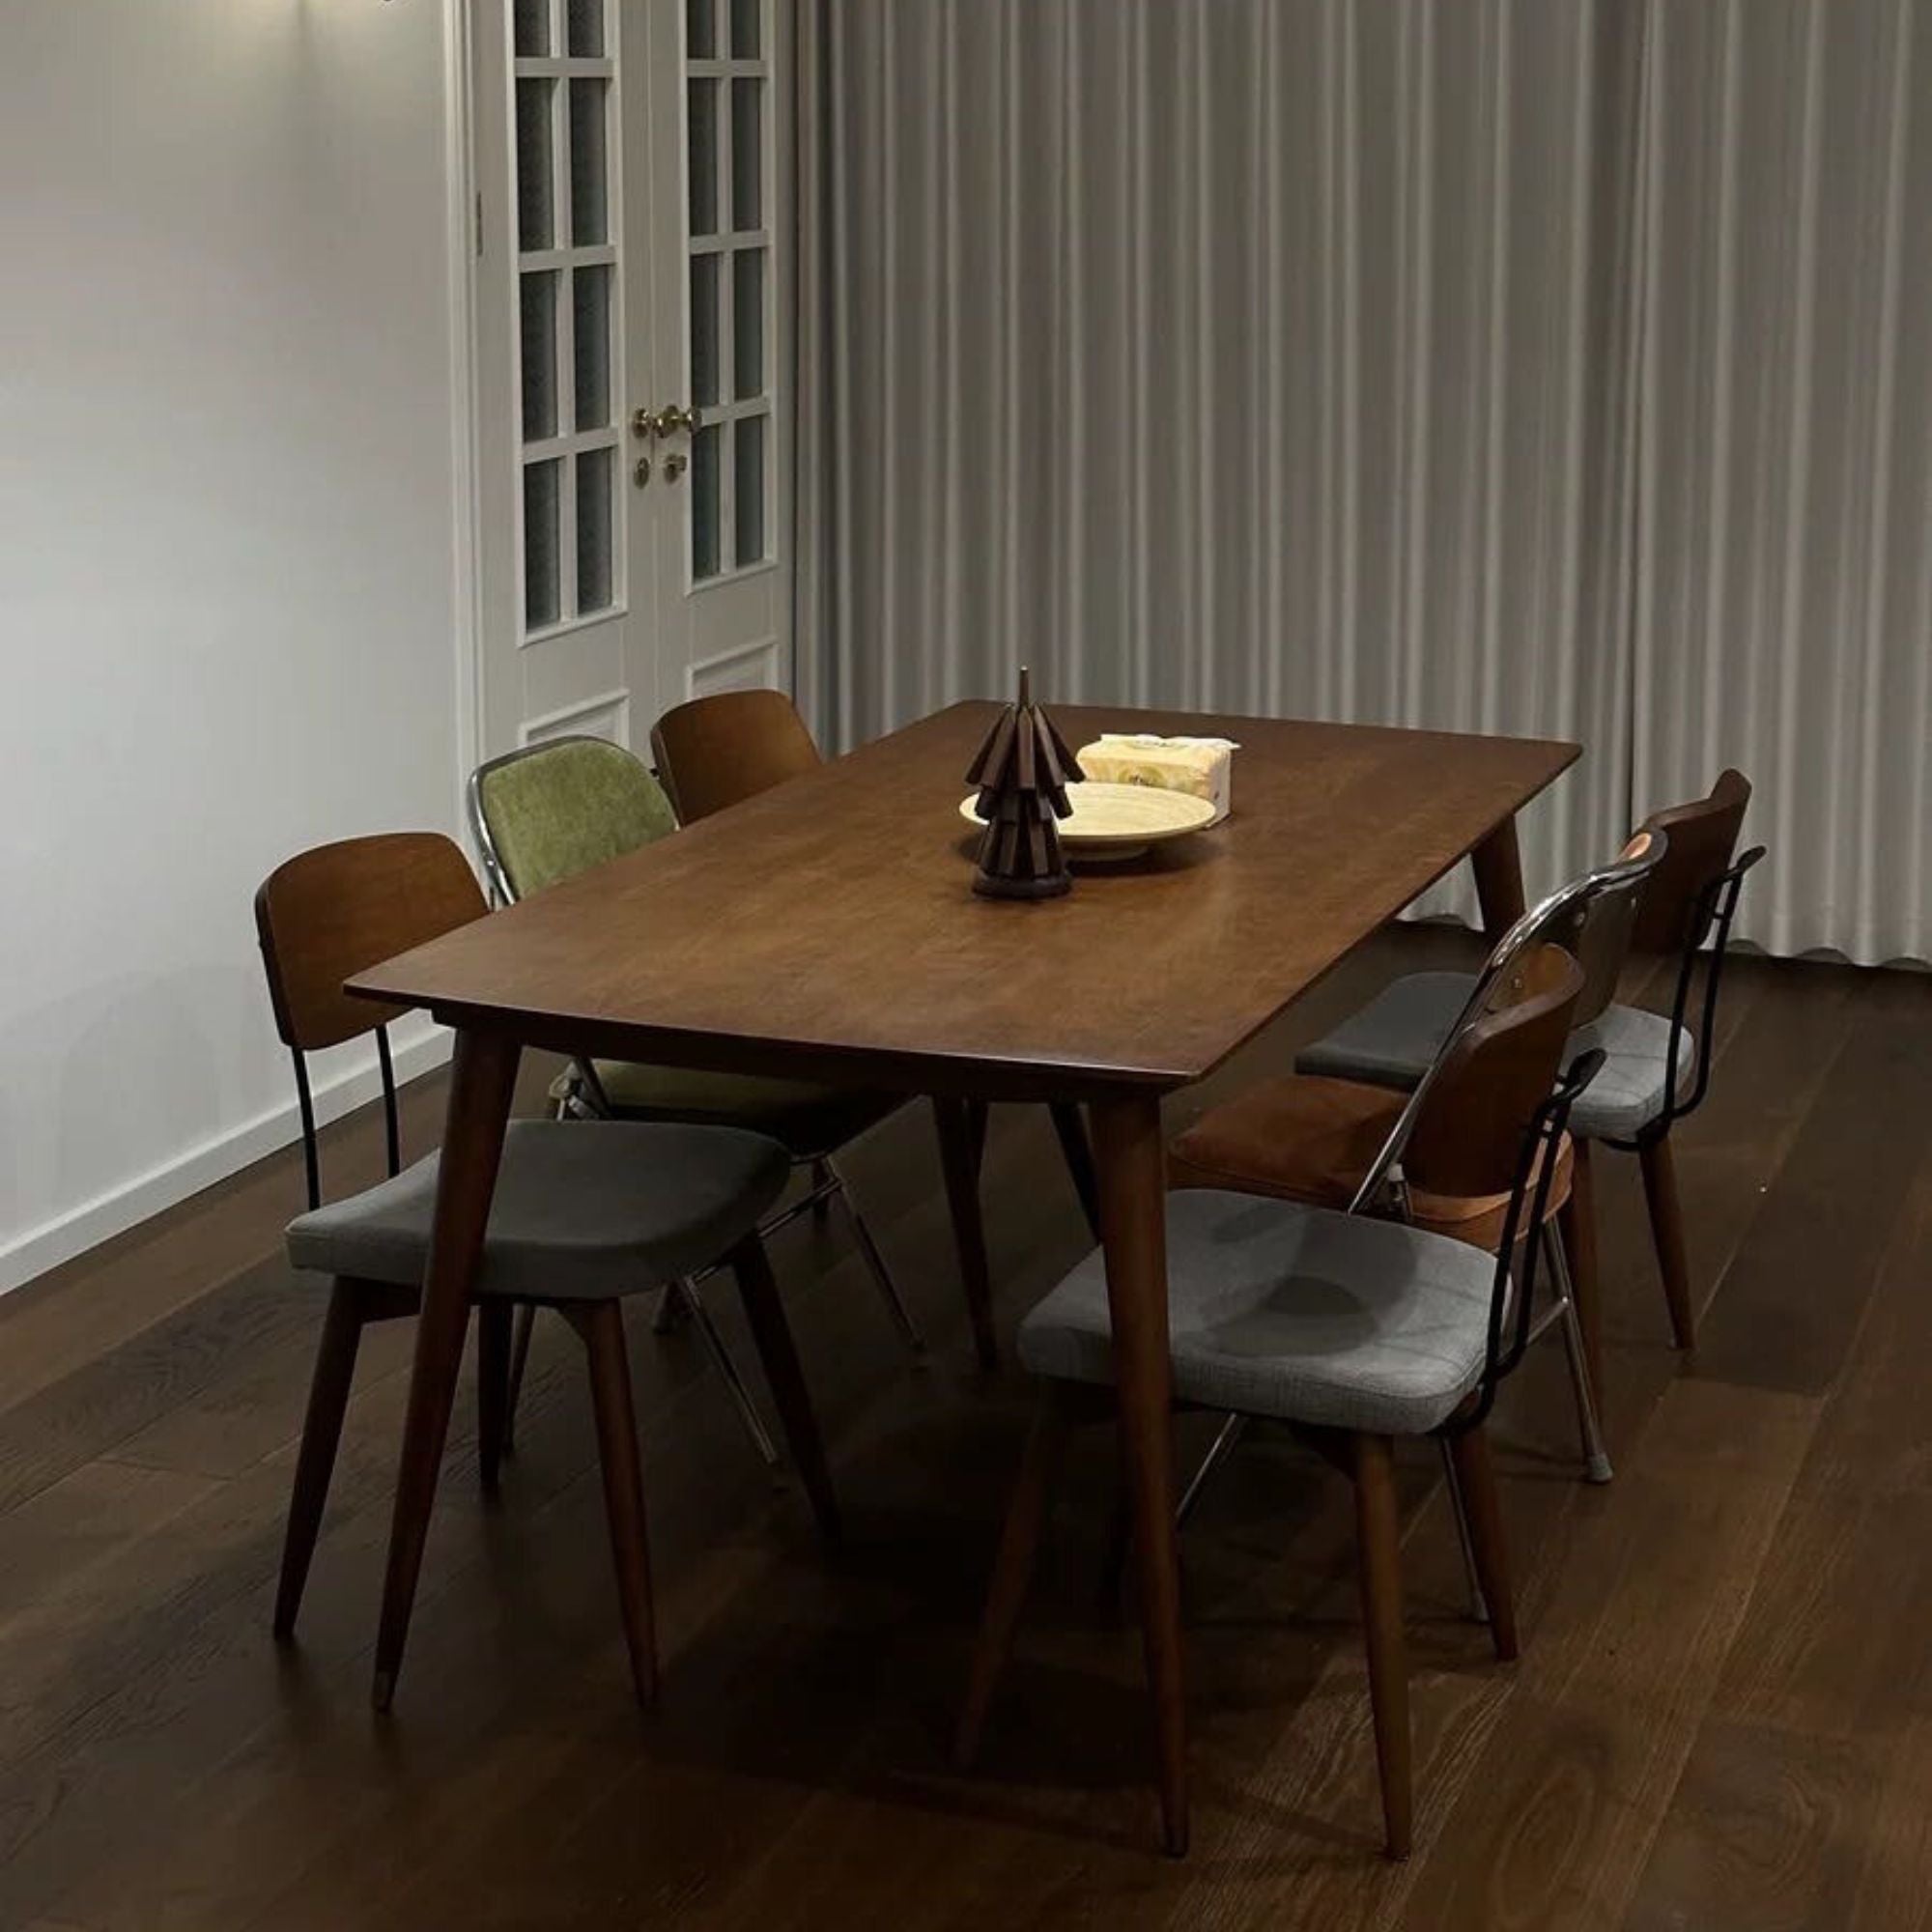 Tate poplar wood chair as part of dining table set